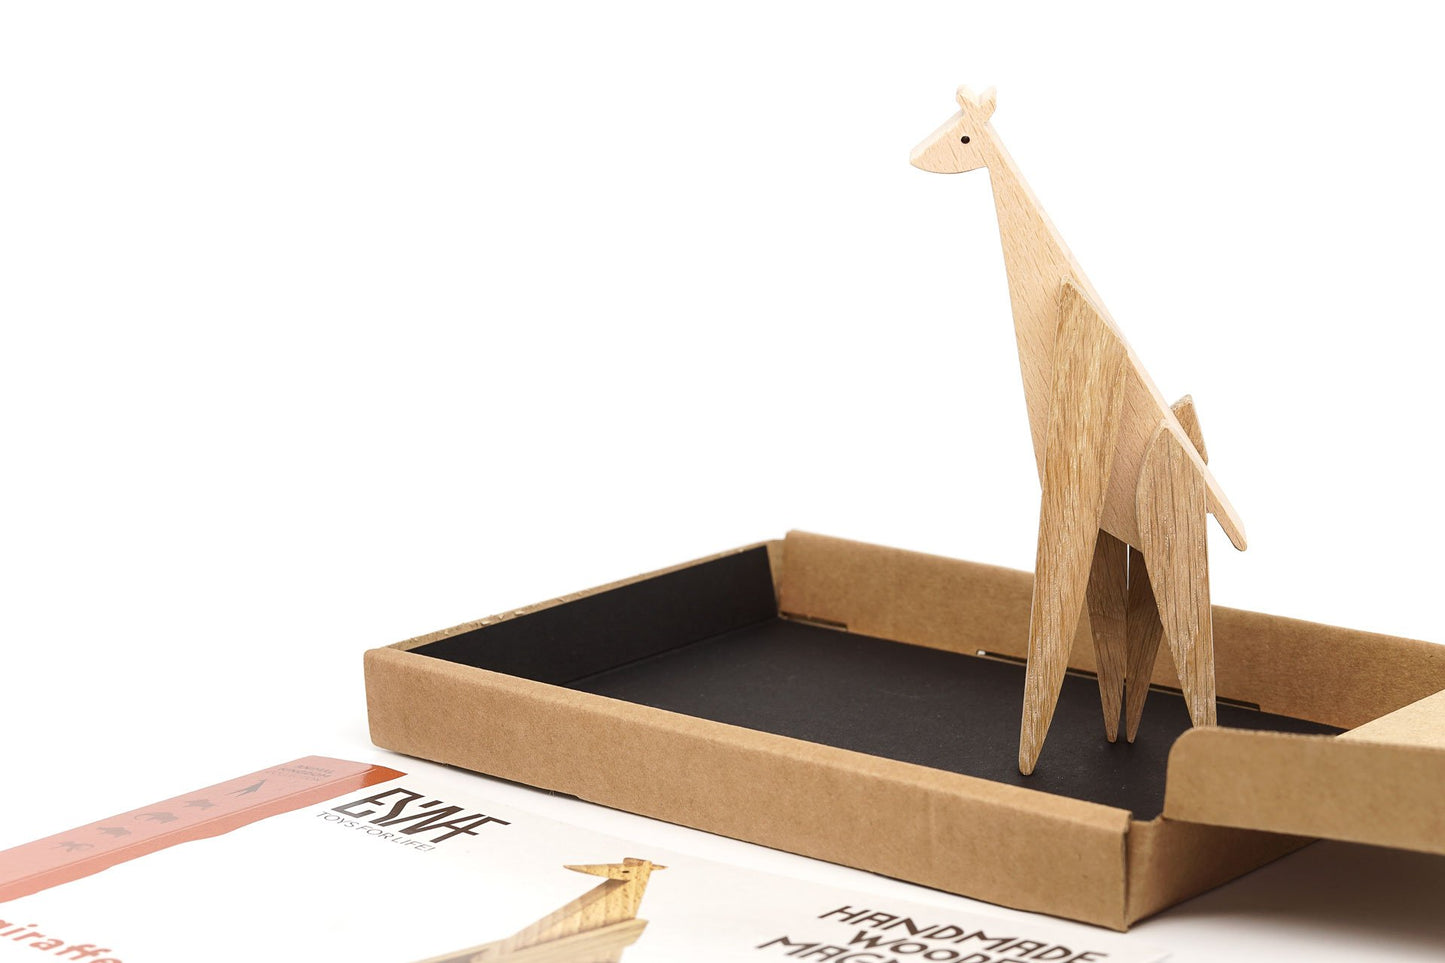 Magnetic wooden toy giraffe assembled from various shapes and forms